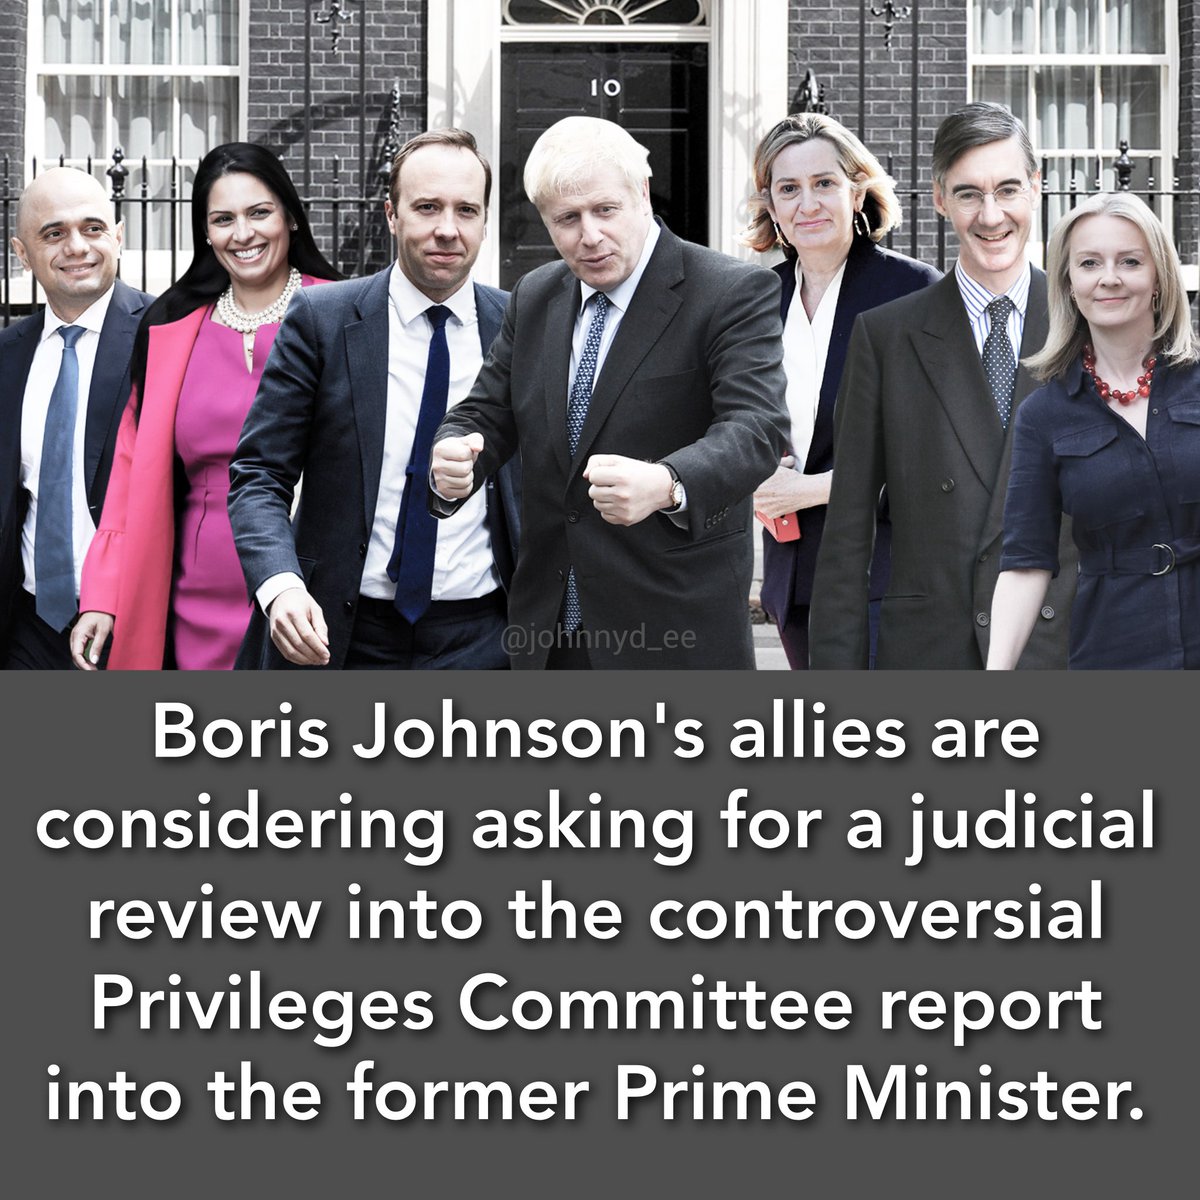 🚨 #Tory MPs who support  @BorisJohnson have over the weekend, agreed to his request for them to boycott todays HoC vote against him.

Crooked, the lot of them.

#NeverTrustATory #ToriesOut347 #ToryLiars
#ToriesPartiedPeopleDied 
#BorisJohnson #BorisTheLiar 

💻 @Daily_Express